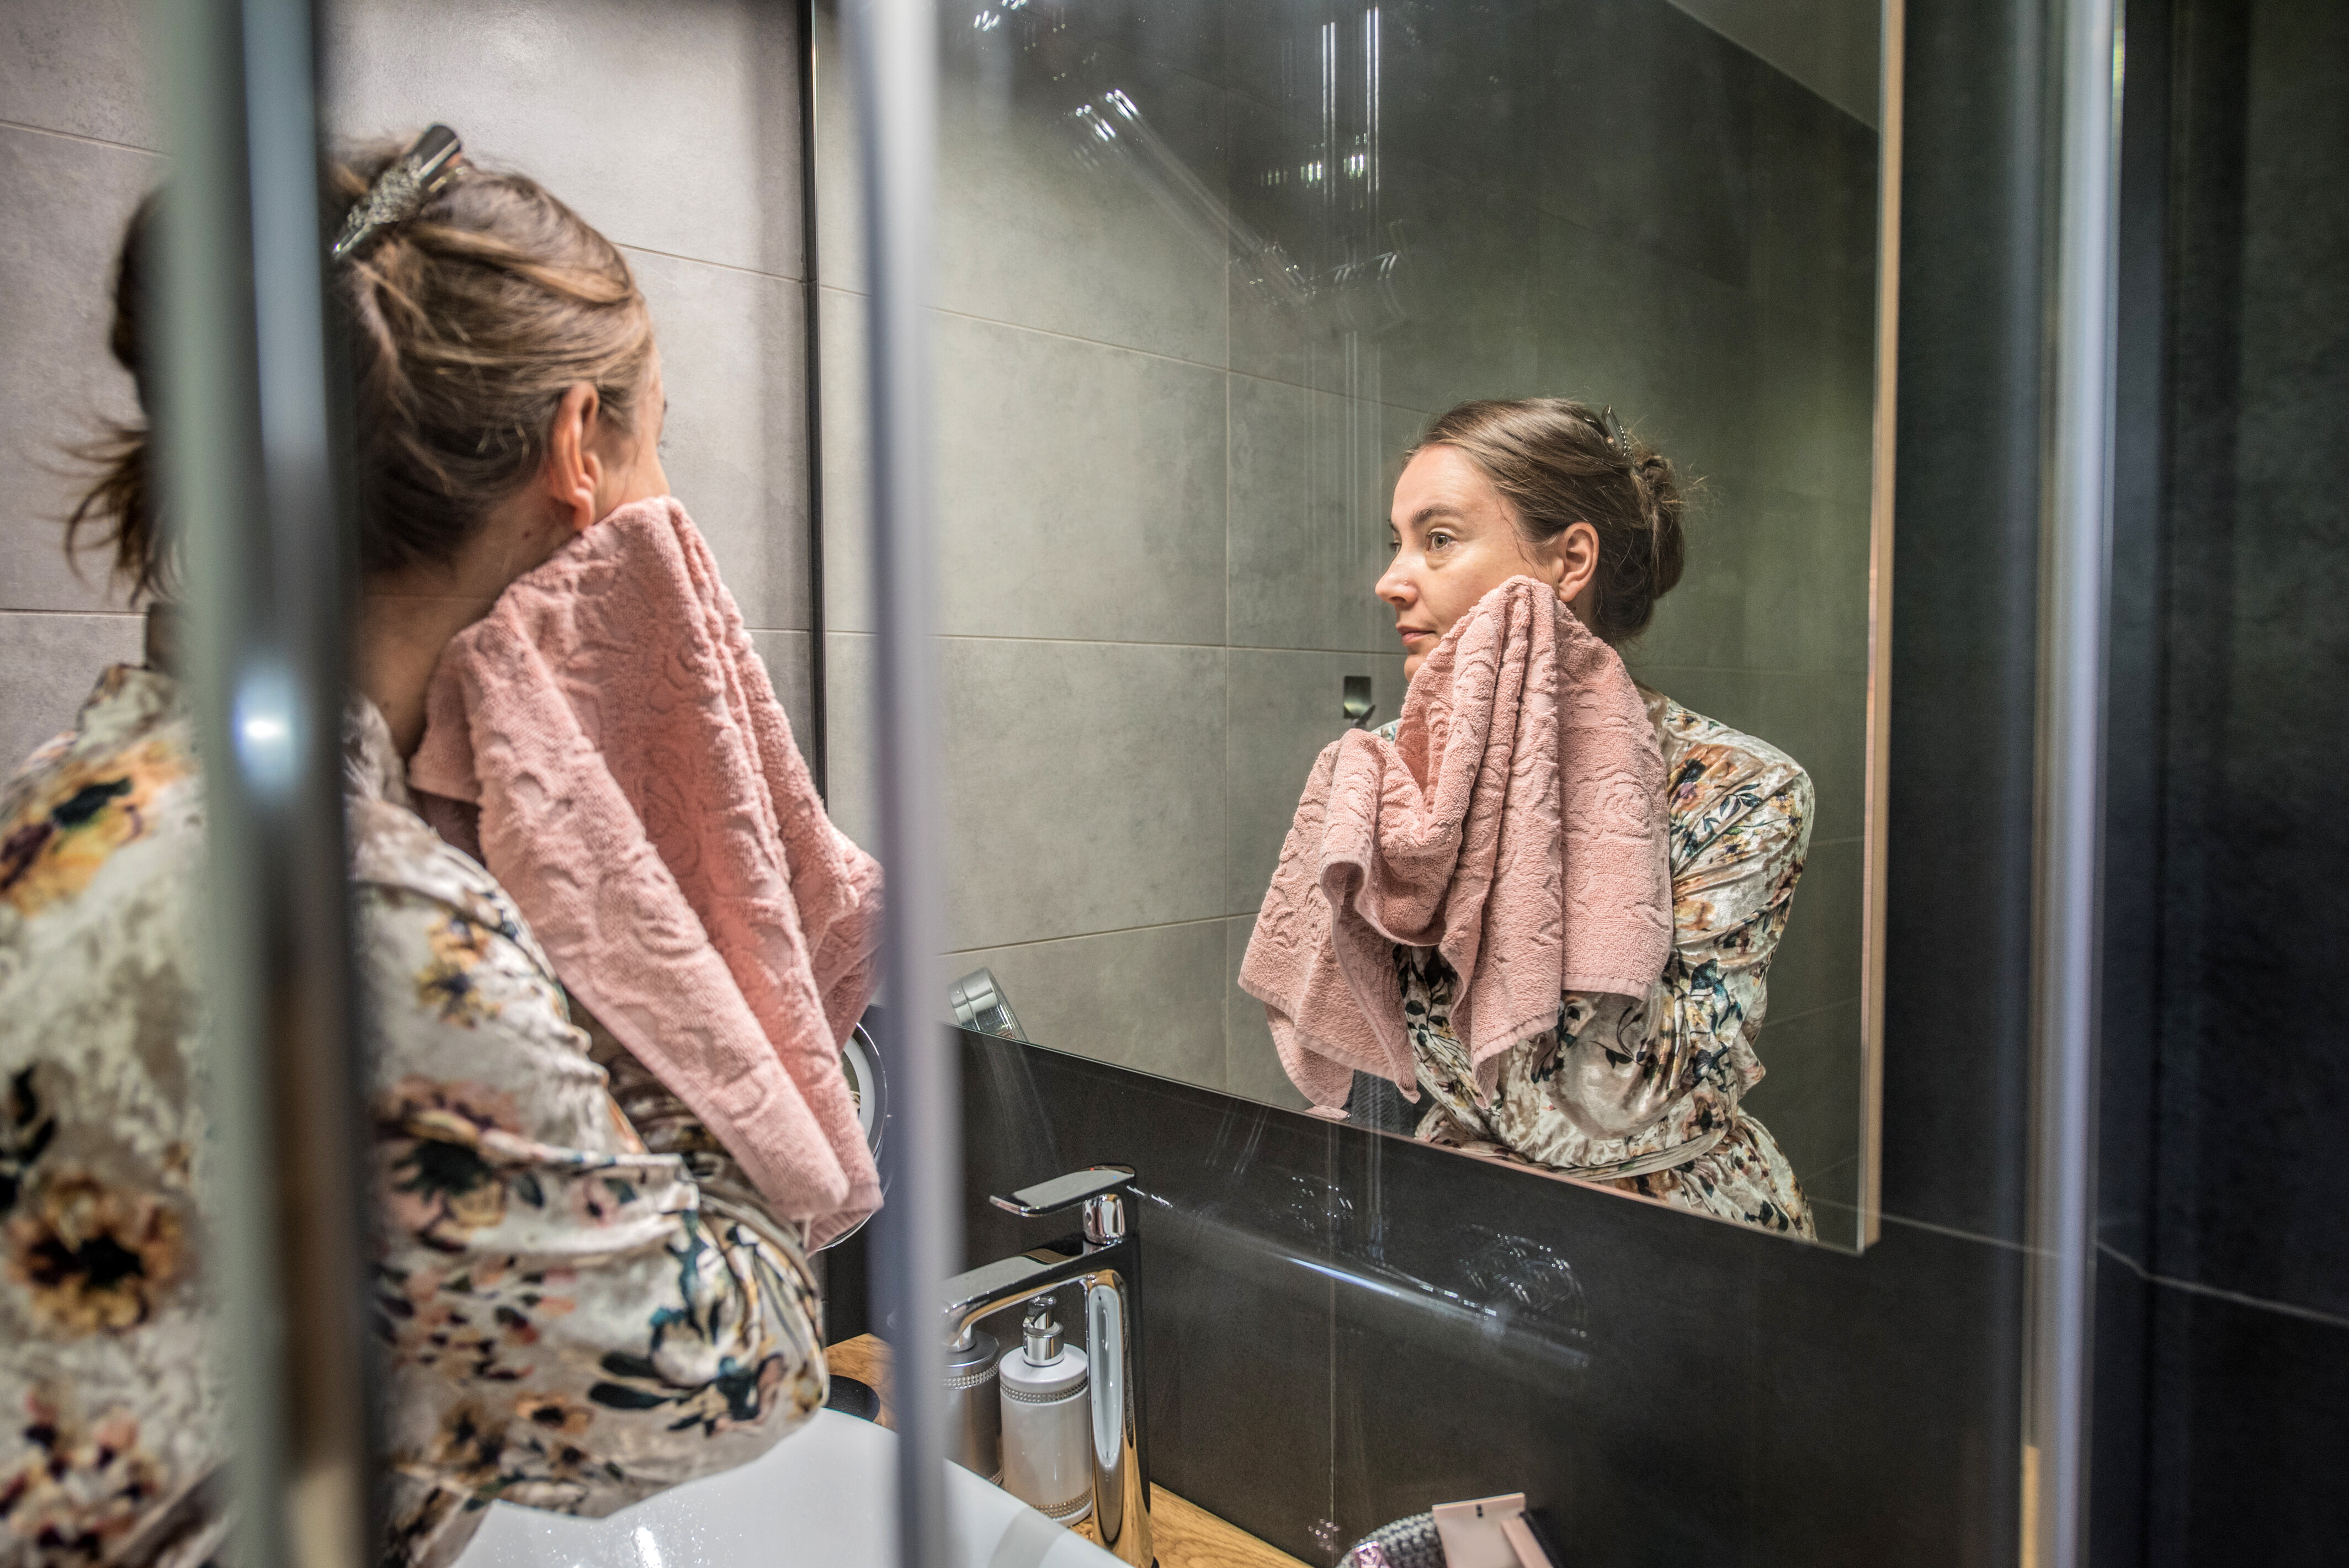 A woman looking at herself in a bathroom mirror, using a towel to wipe her face